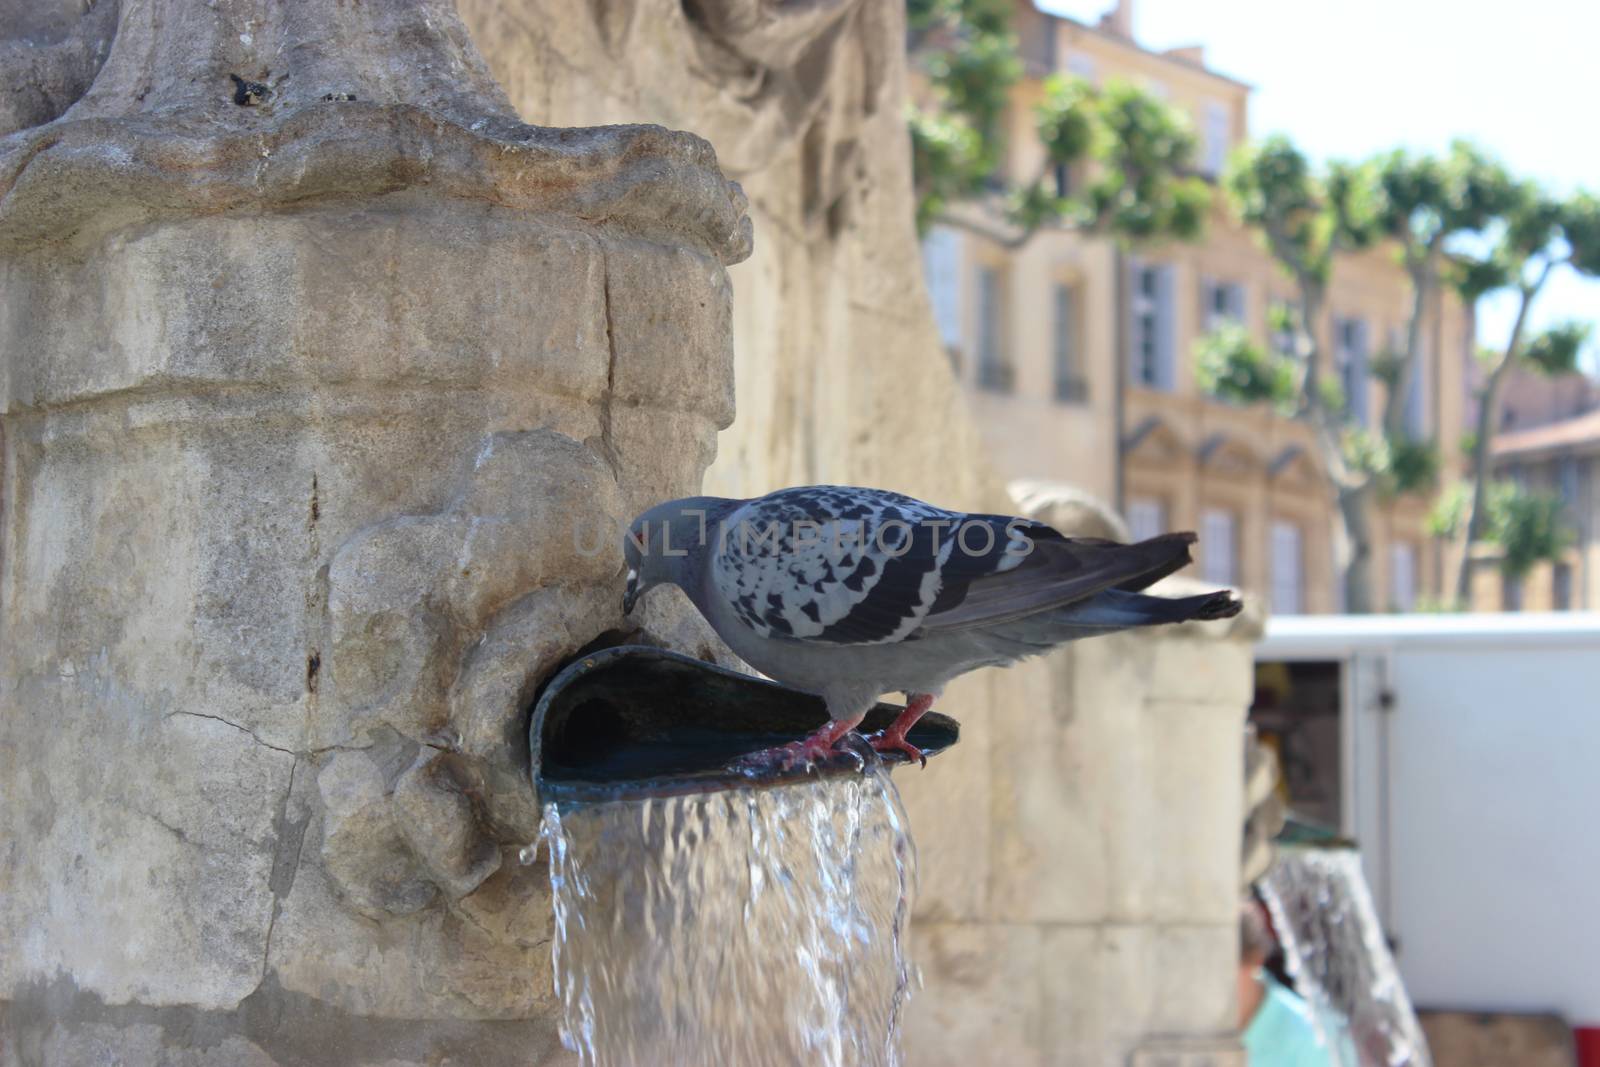 Pigeons drinking water from the Water Fountain by bensib